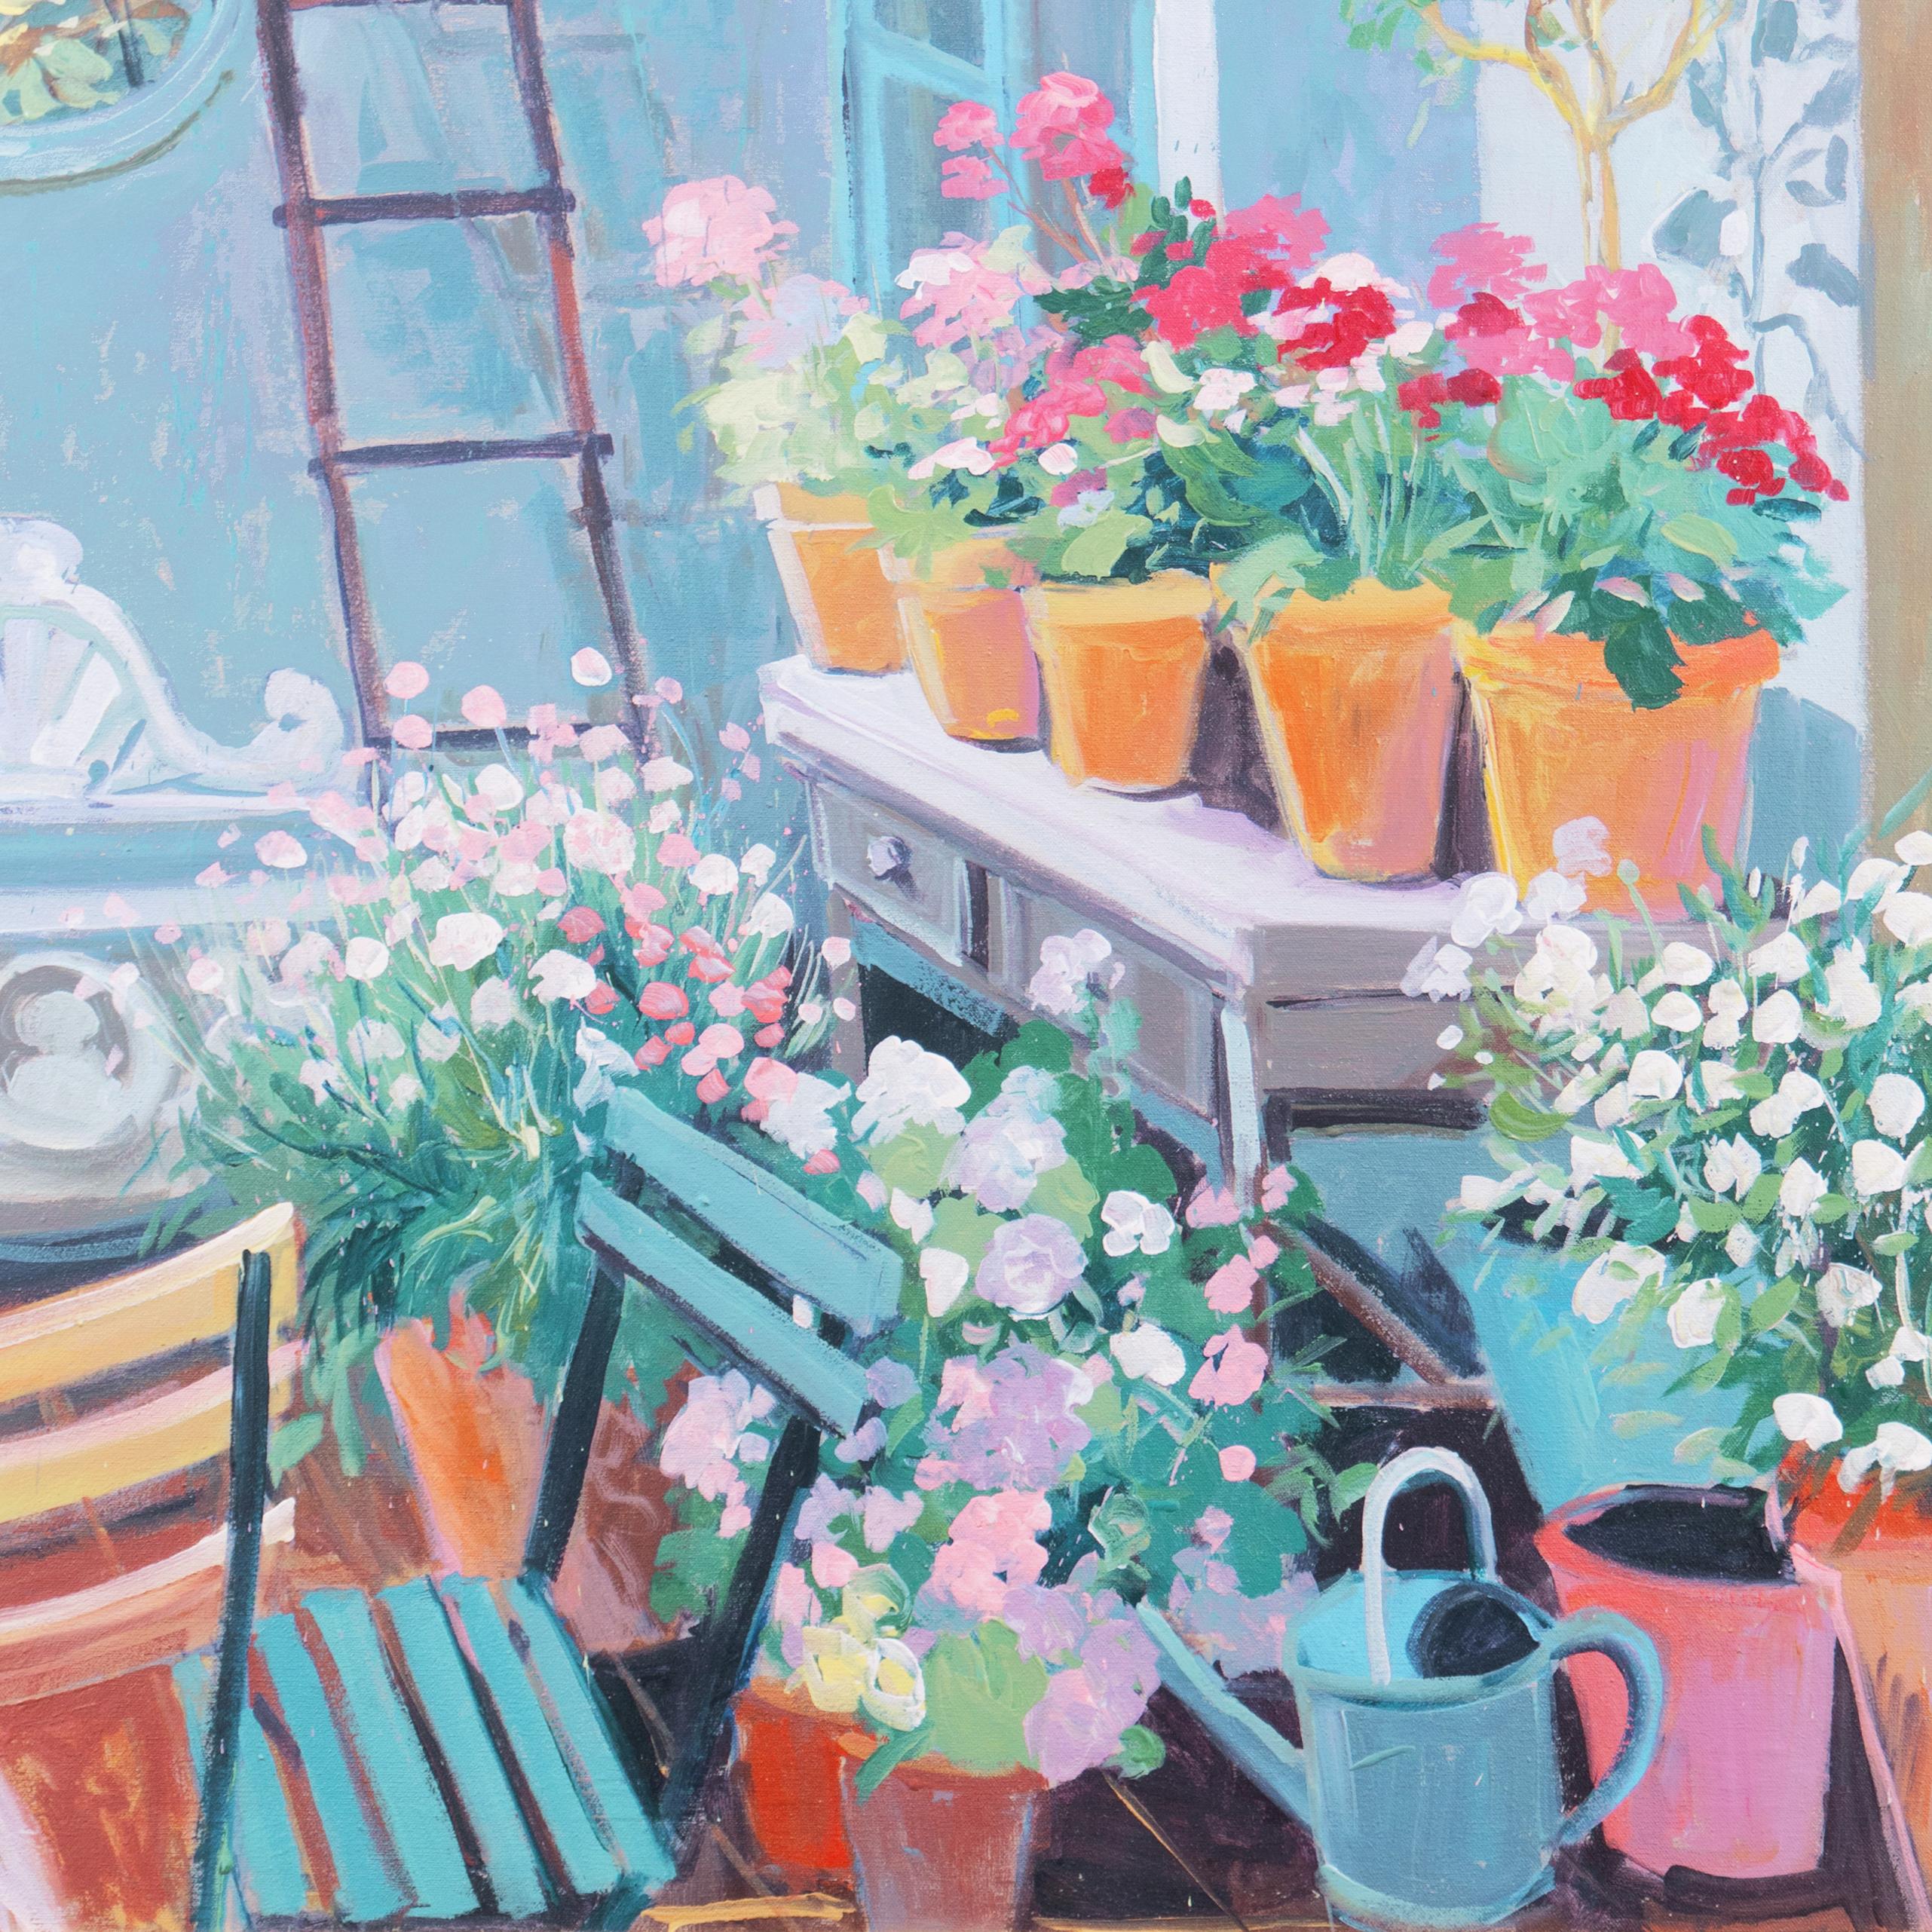 'In the Potting Shed', Large Floral Oil, California College of Arts and Crafts - Post-Impressionist Painting by Robert DeVee